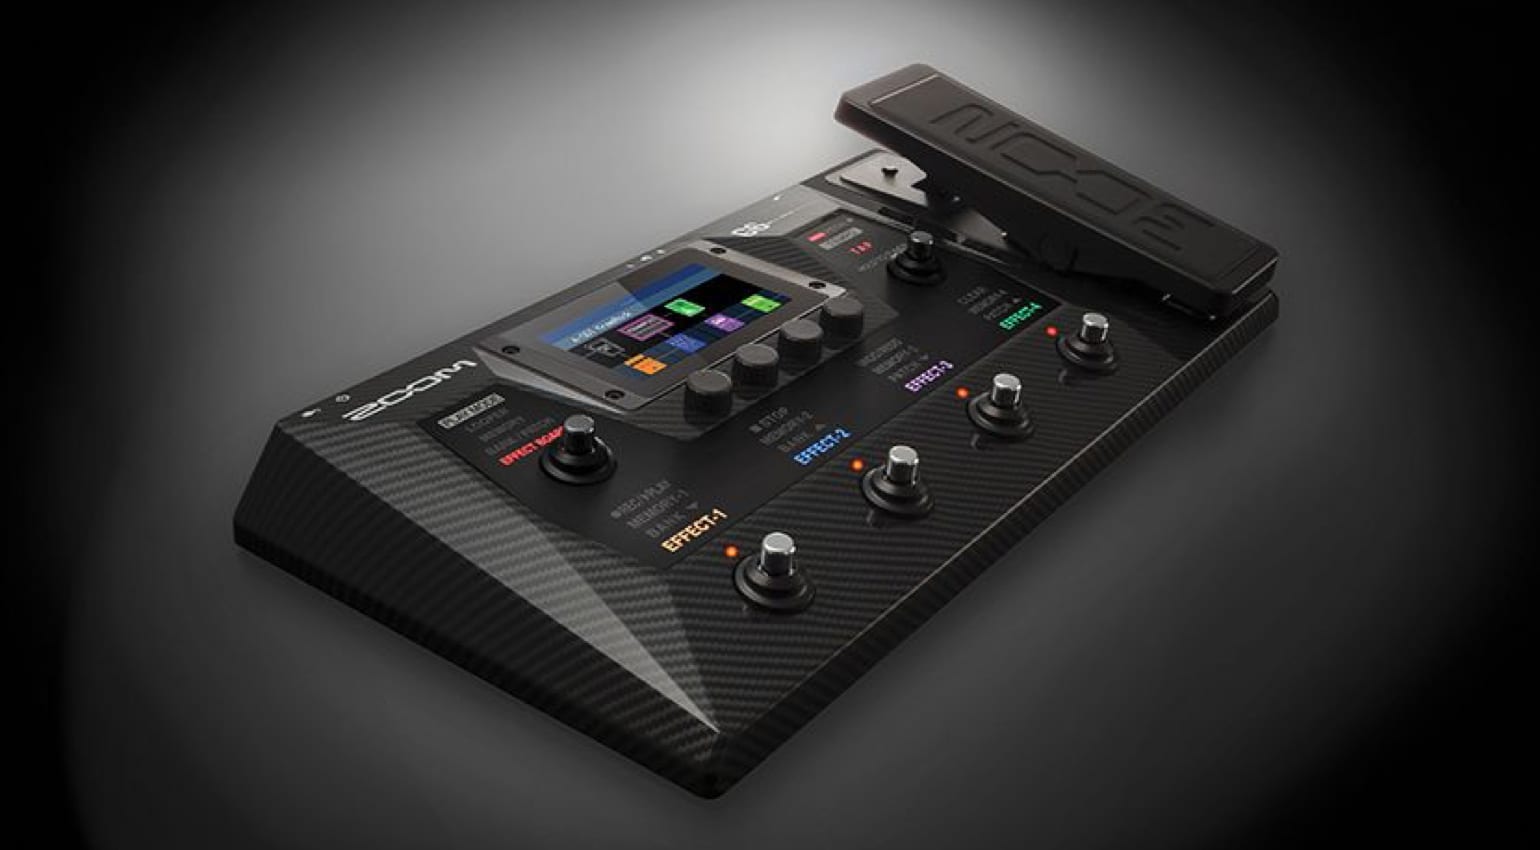 NAMM 2021: Zoom G6 multi-effects guitar pedal gets worldwide